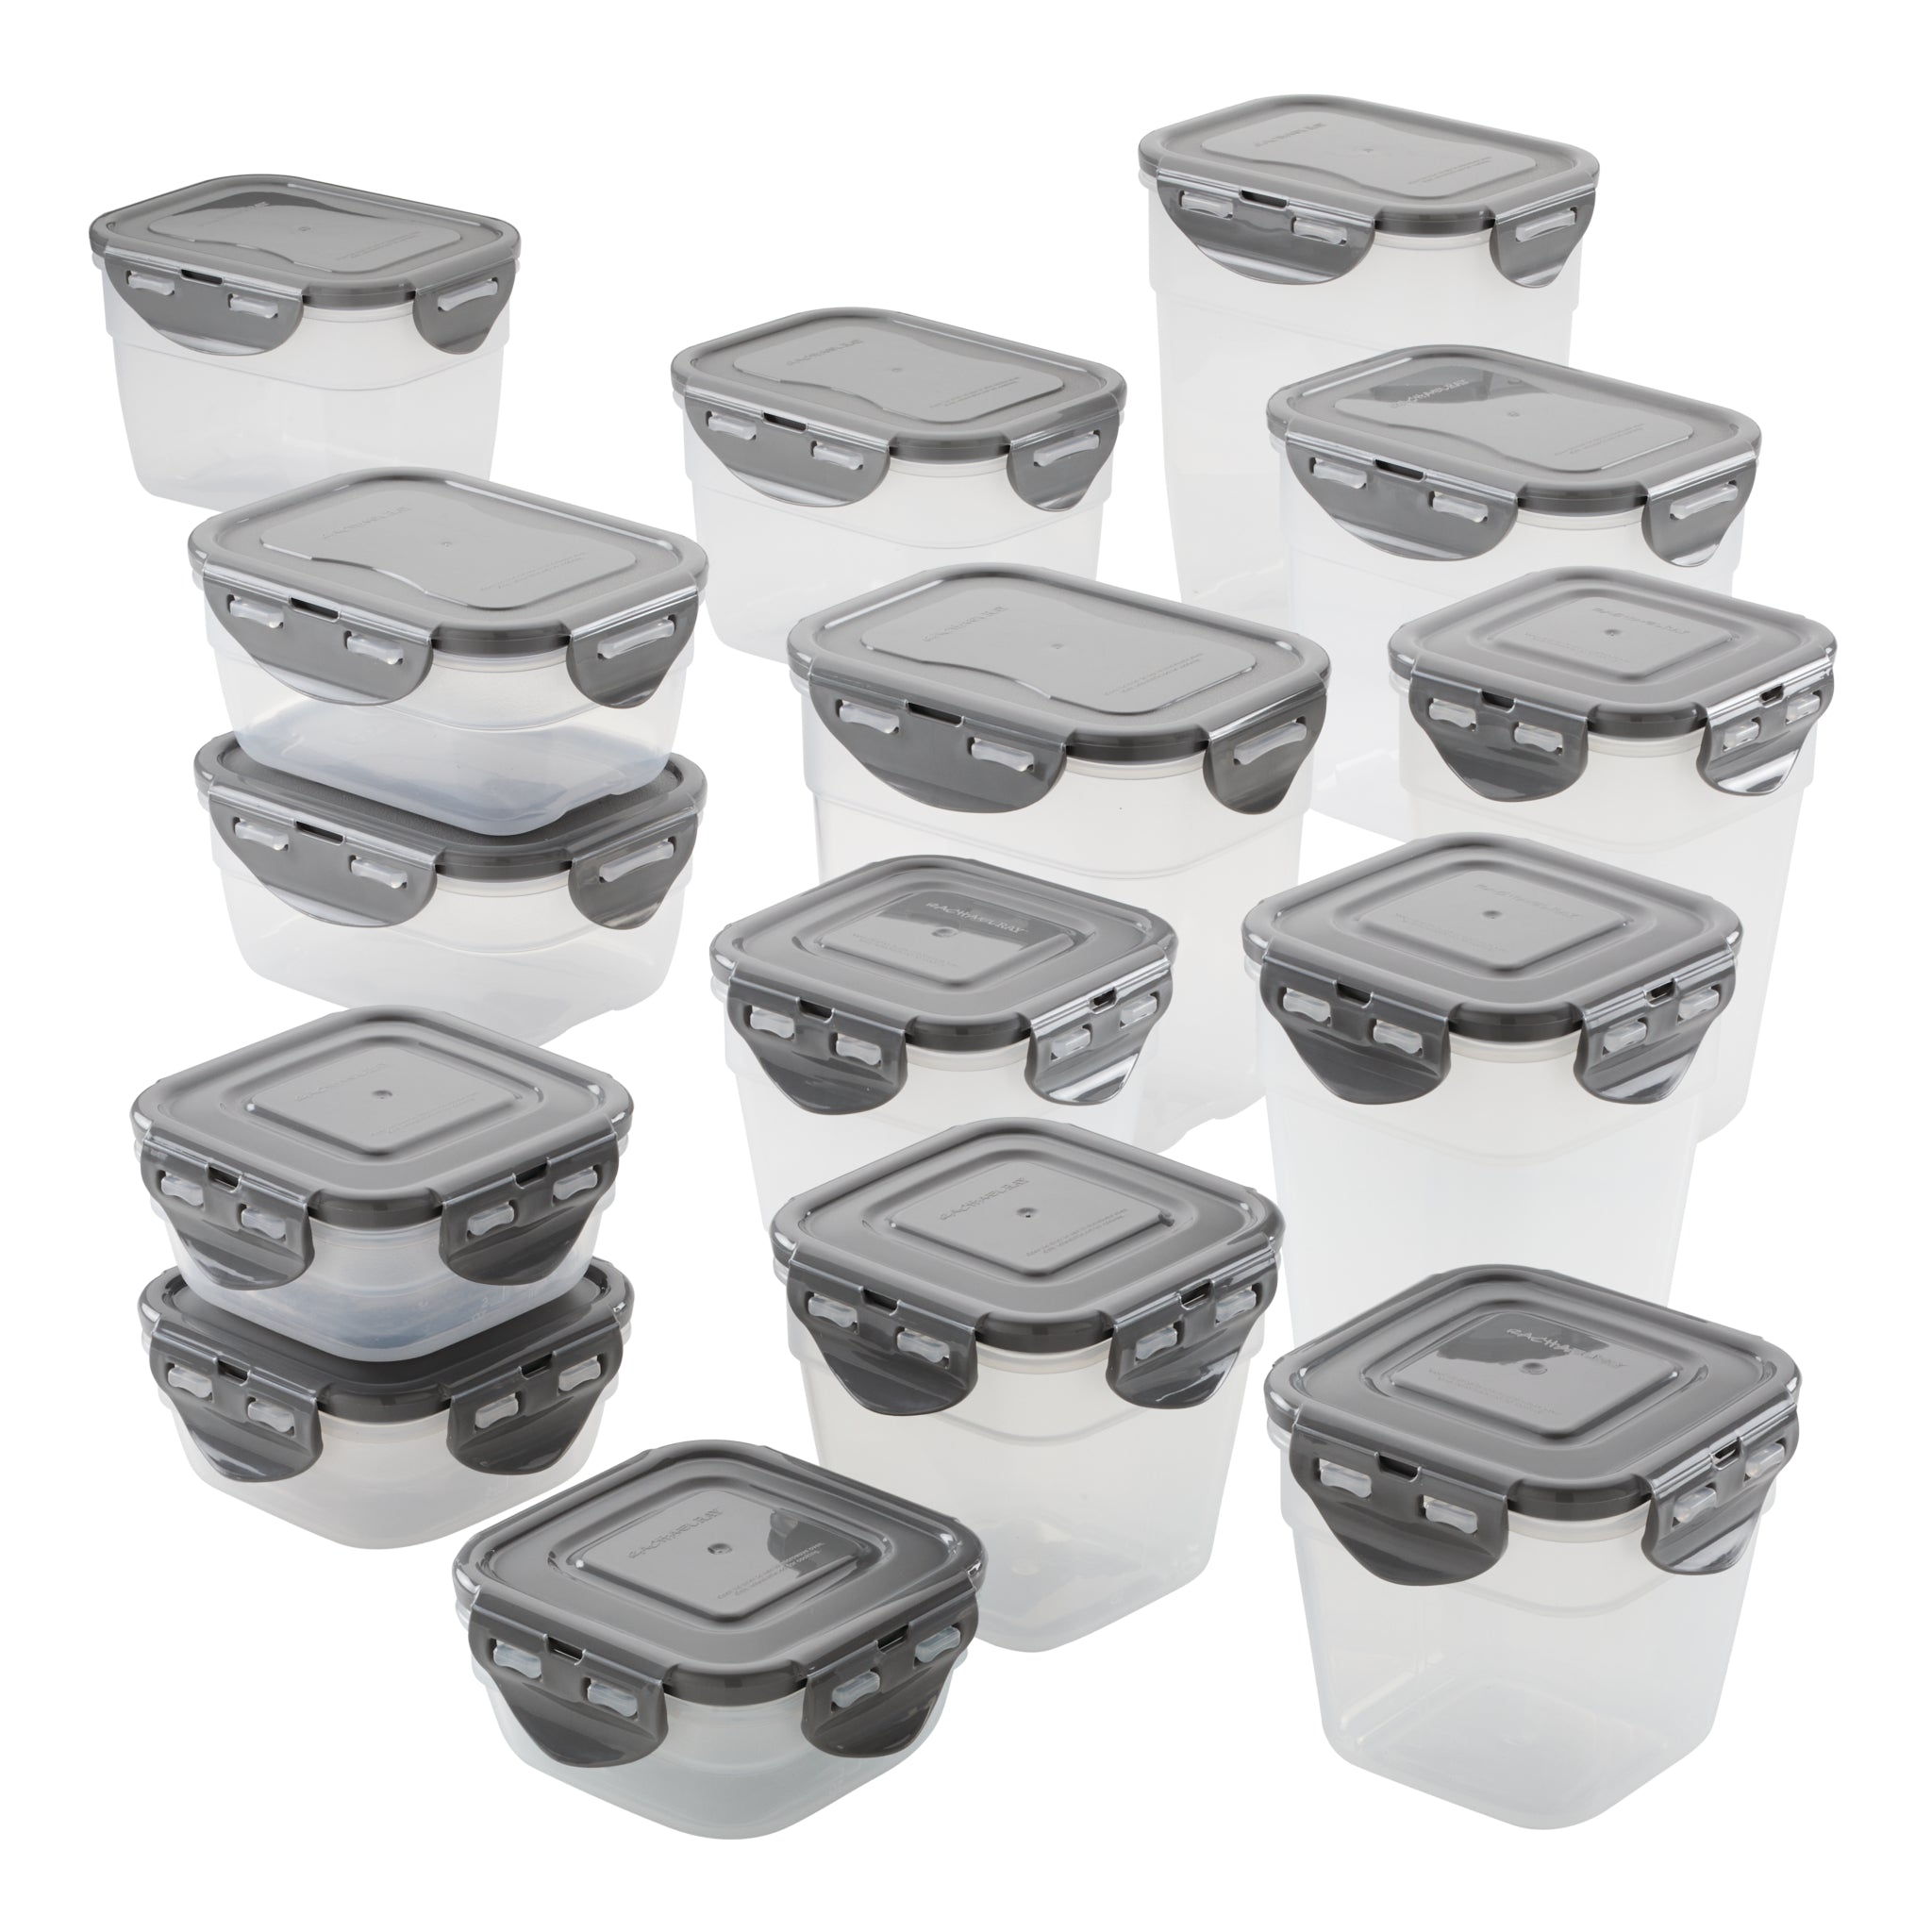 30-Piece Nestable Food Storage Containers